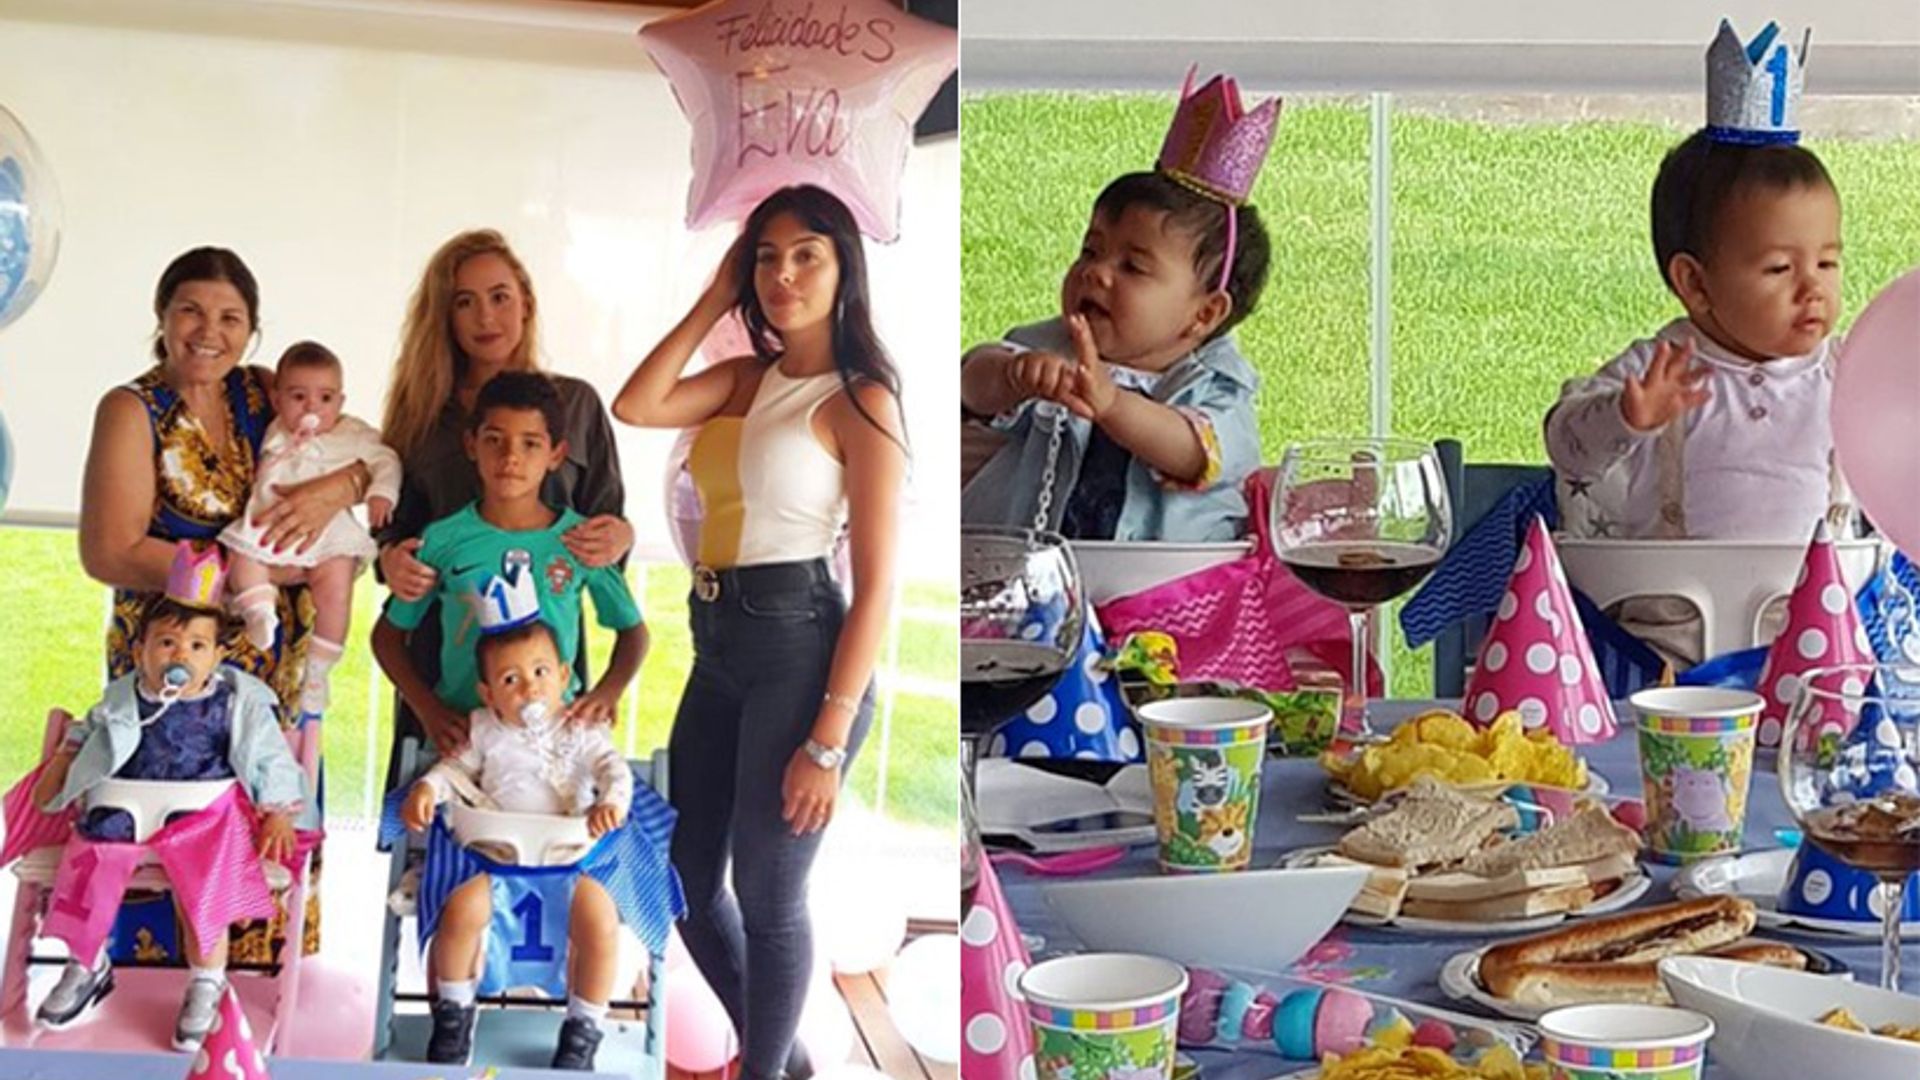 Why Cristiano Ronaldo missed his twins' first birthday party – see photos